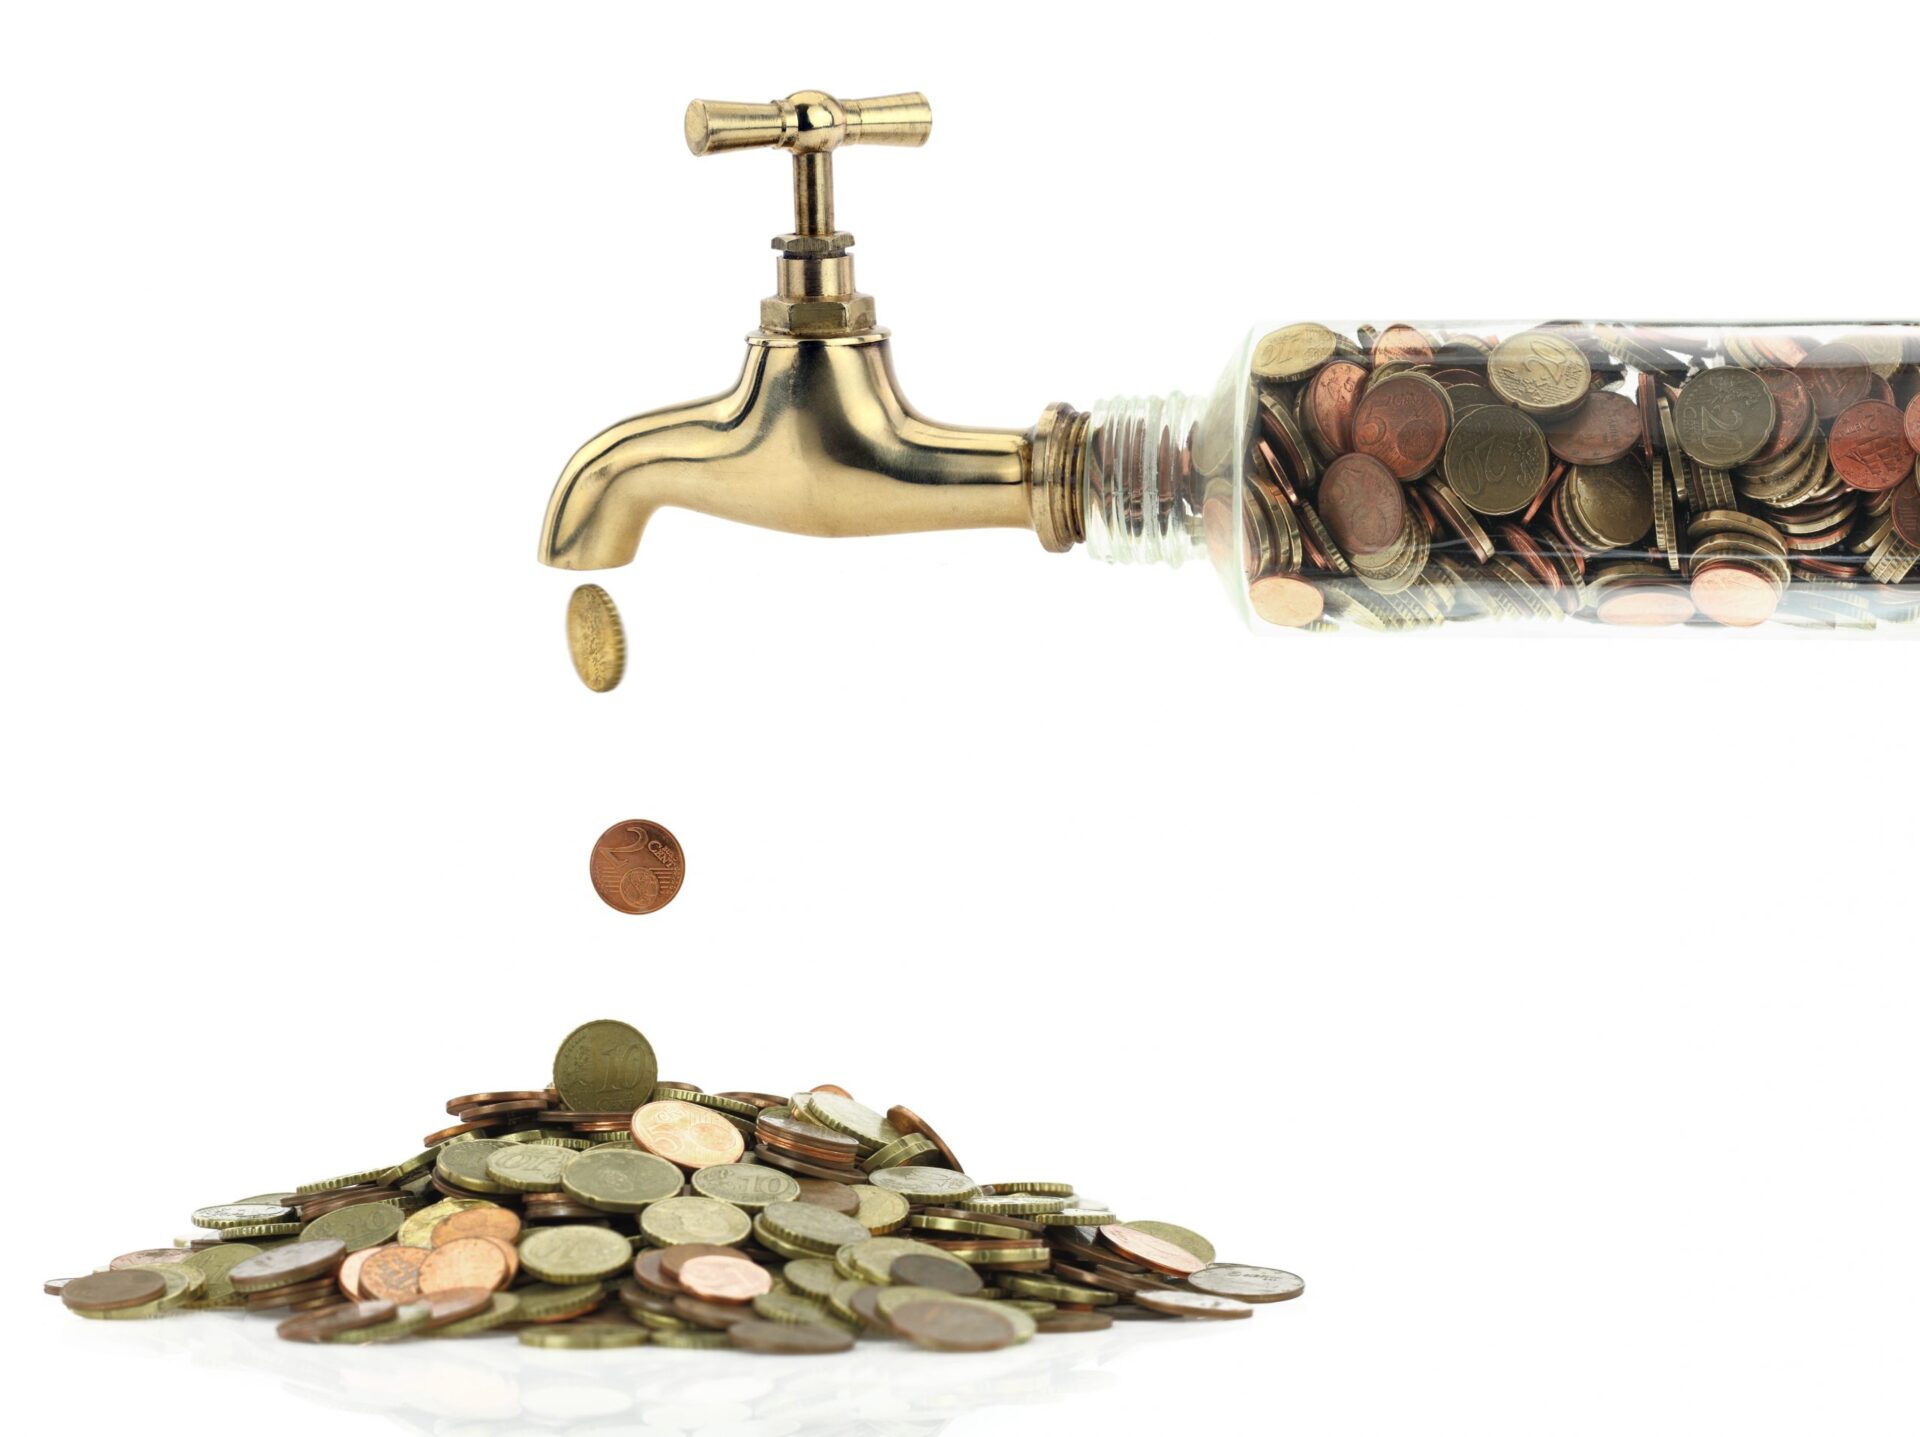 Money coins fall out of the golden tap. Save money on your water bill.